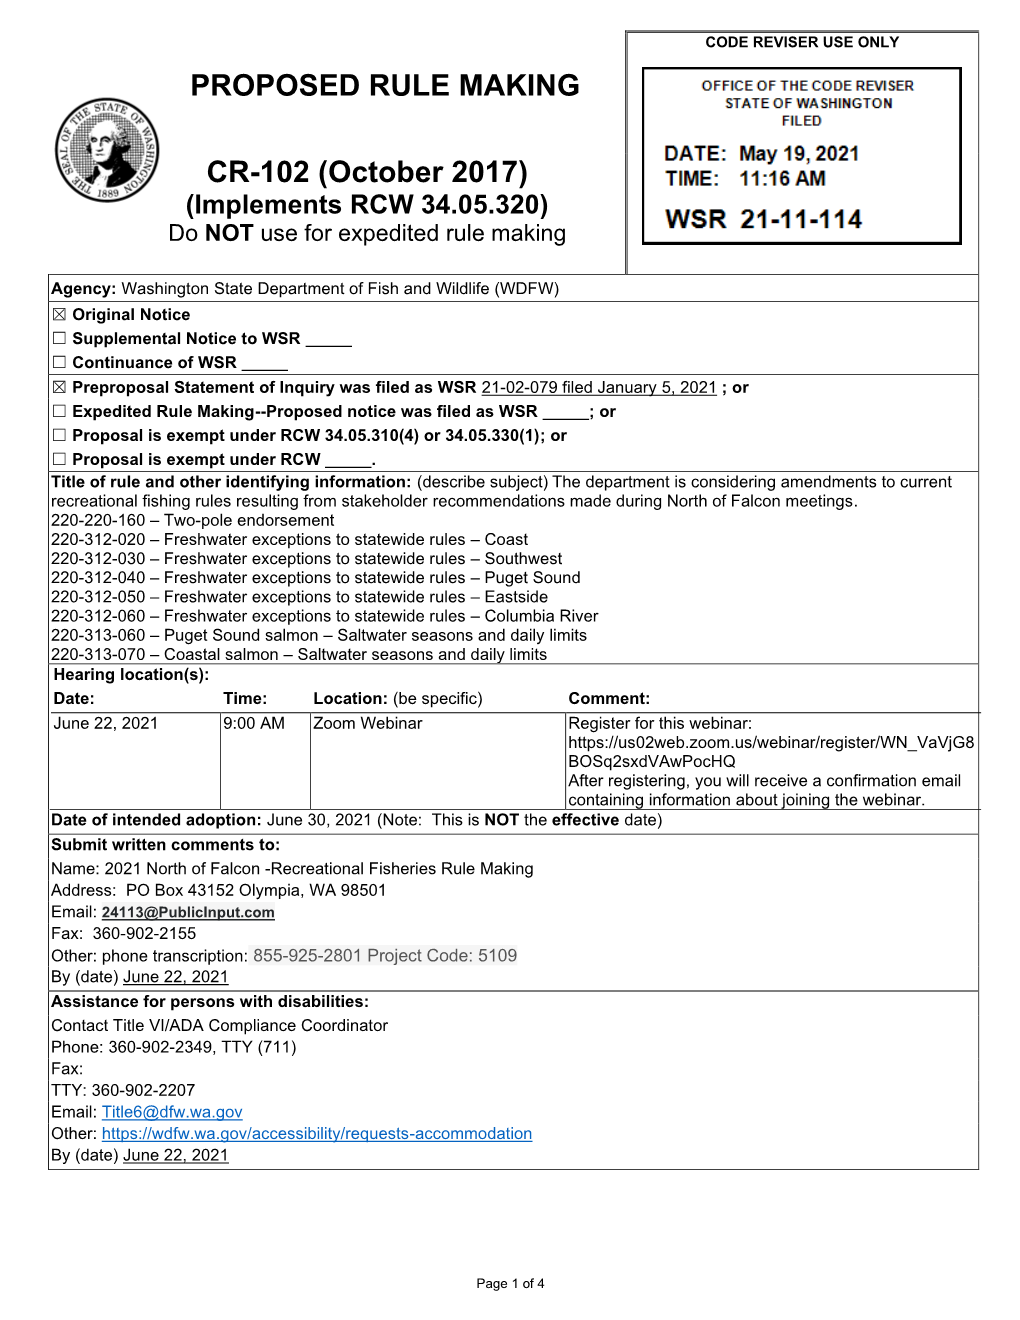 Filed As WSR 21-11-114 on May 19, 2021